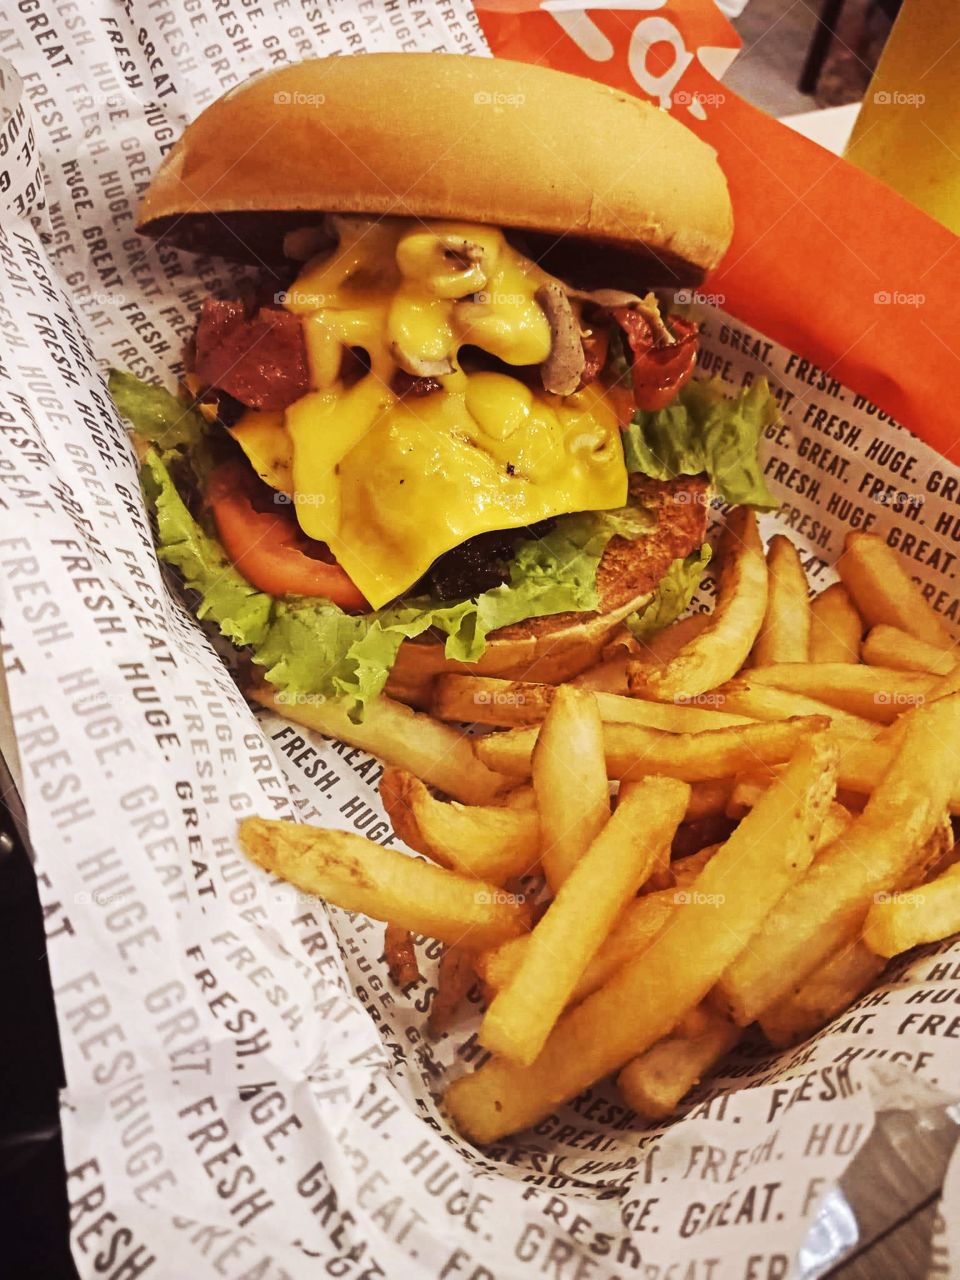 Mouth-watering fries and cheeseburger in one photograph.